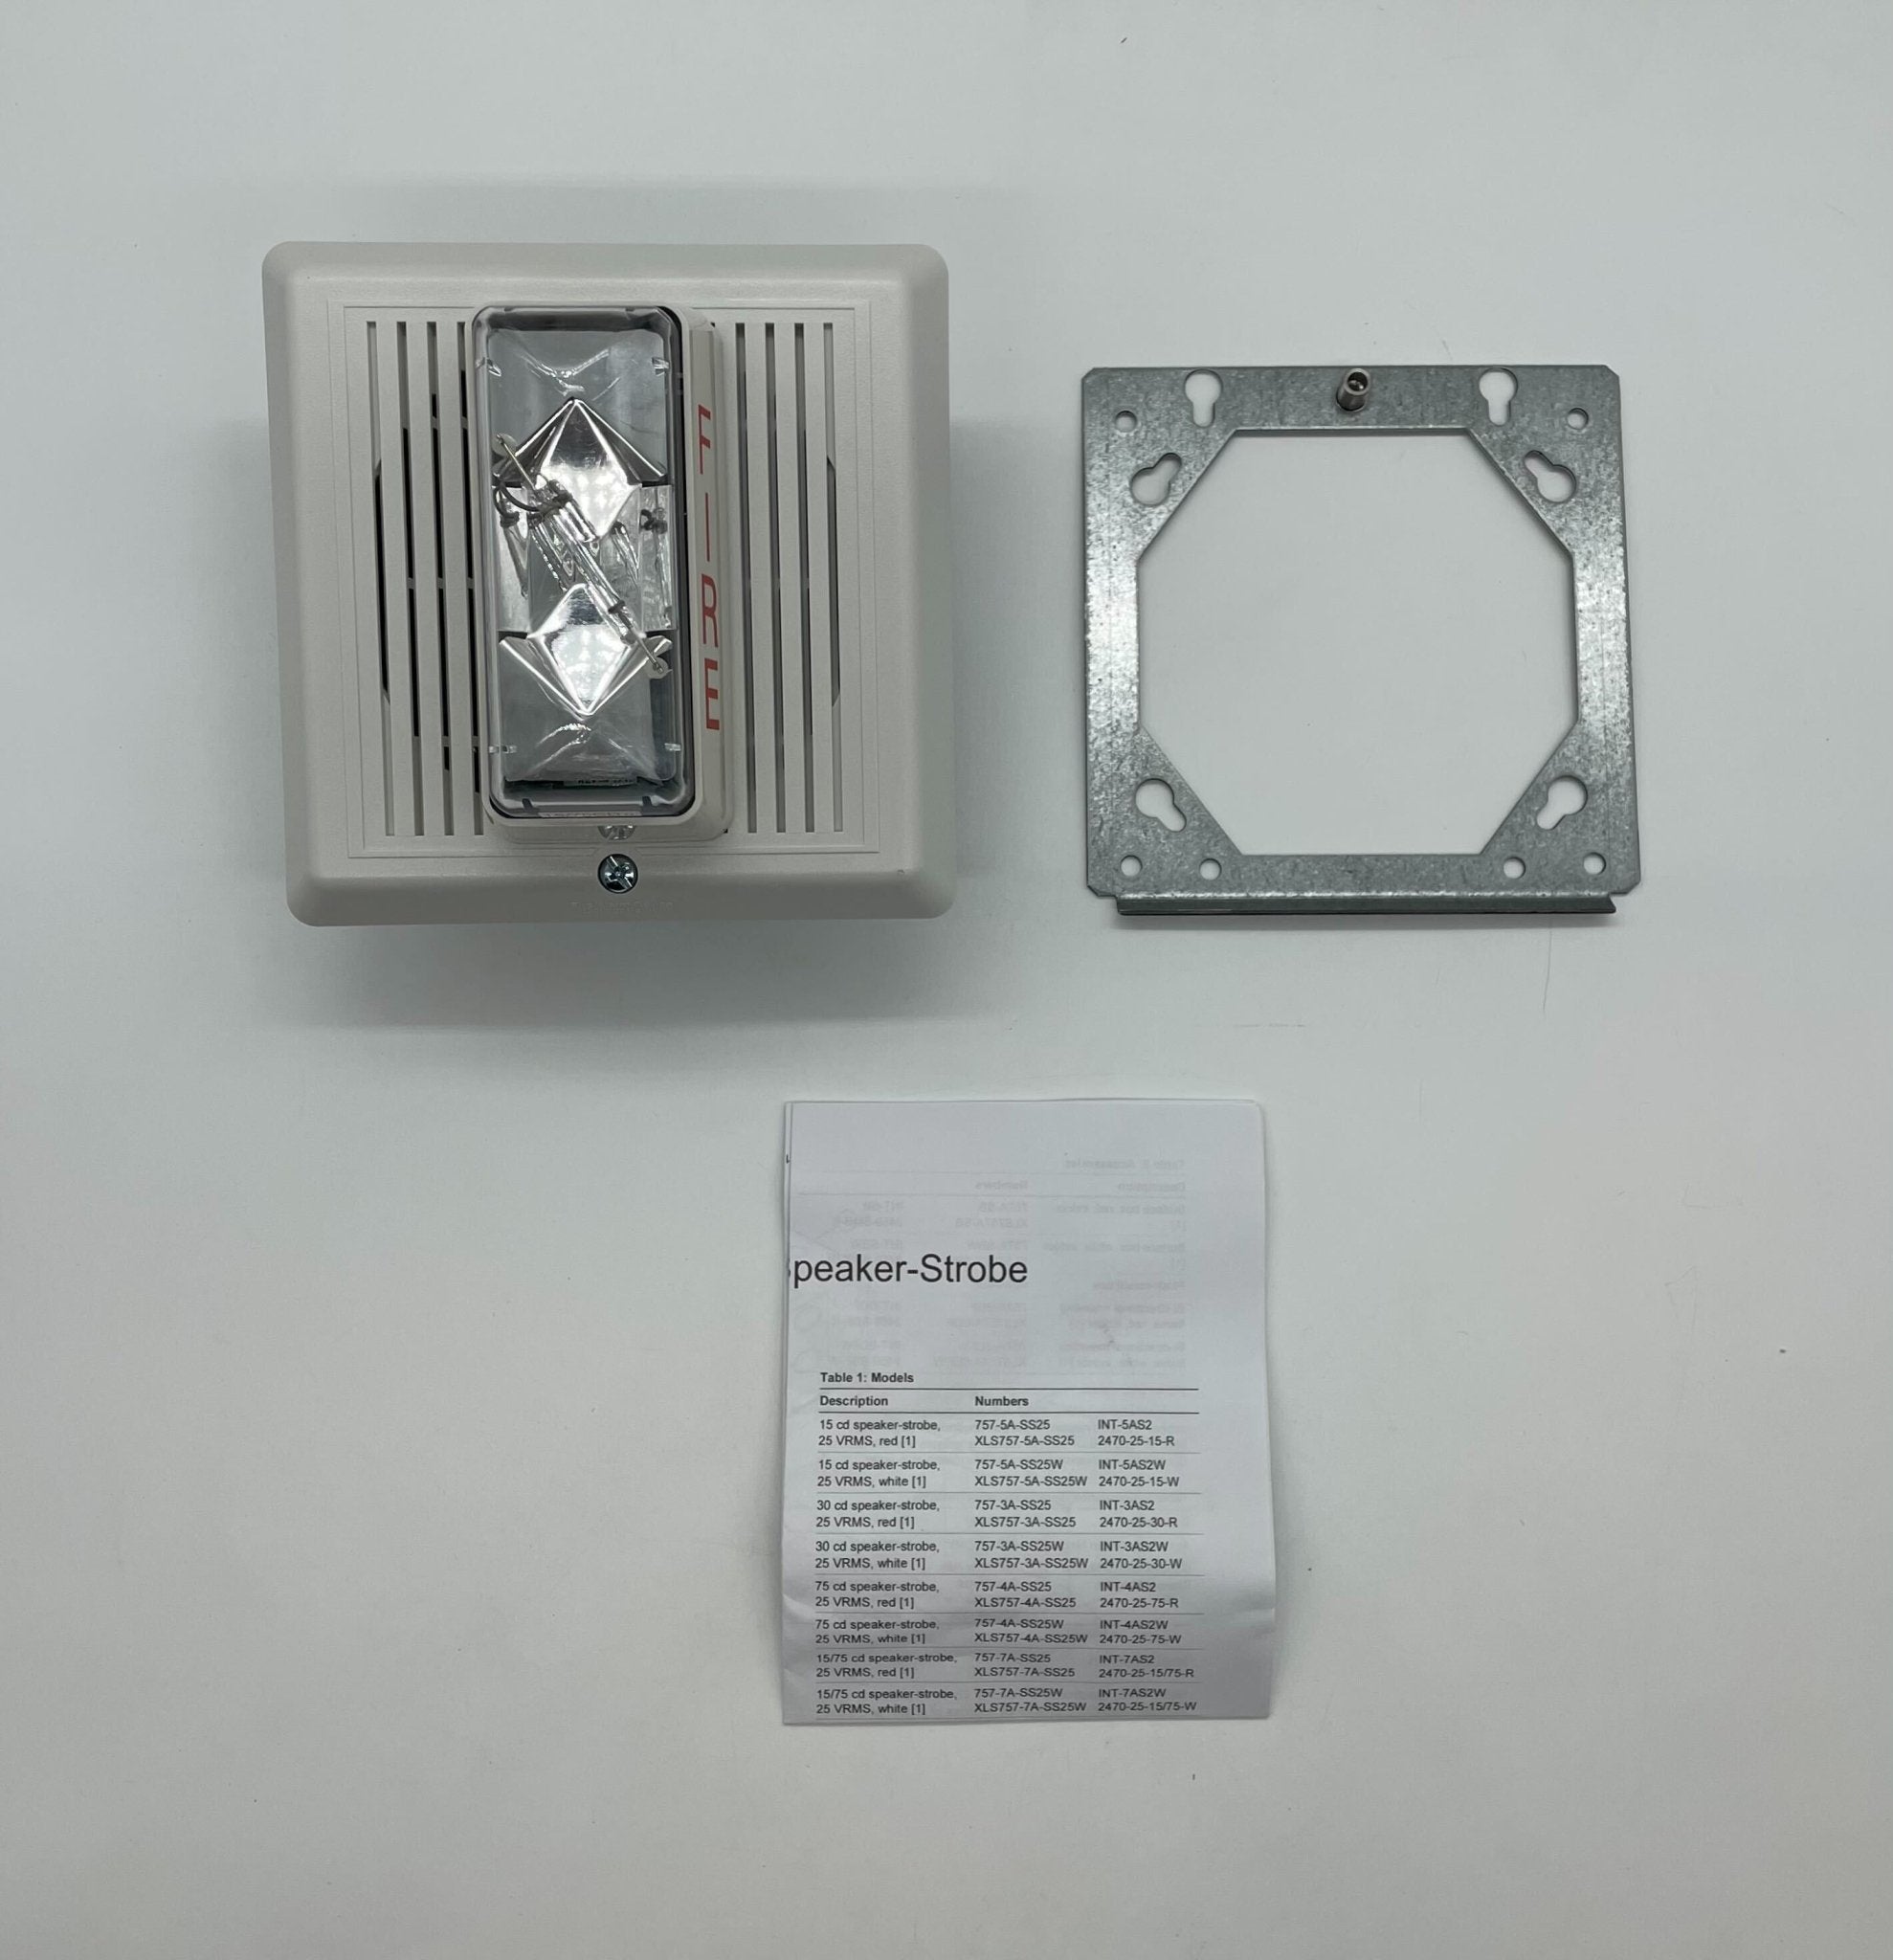 Edwards 757-7A-SS25W - The Fire Alarm Supplier